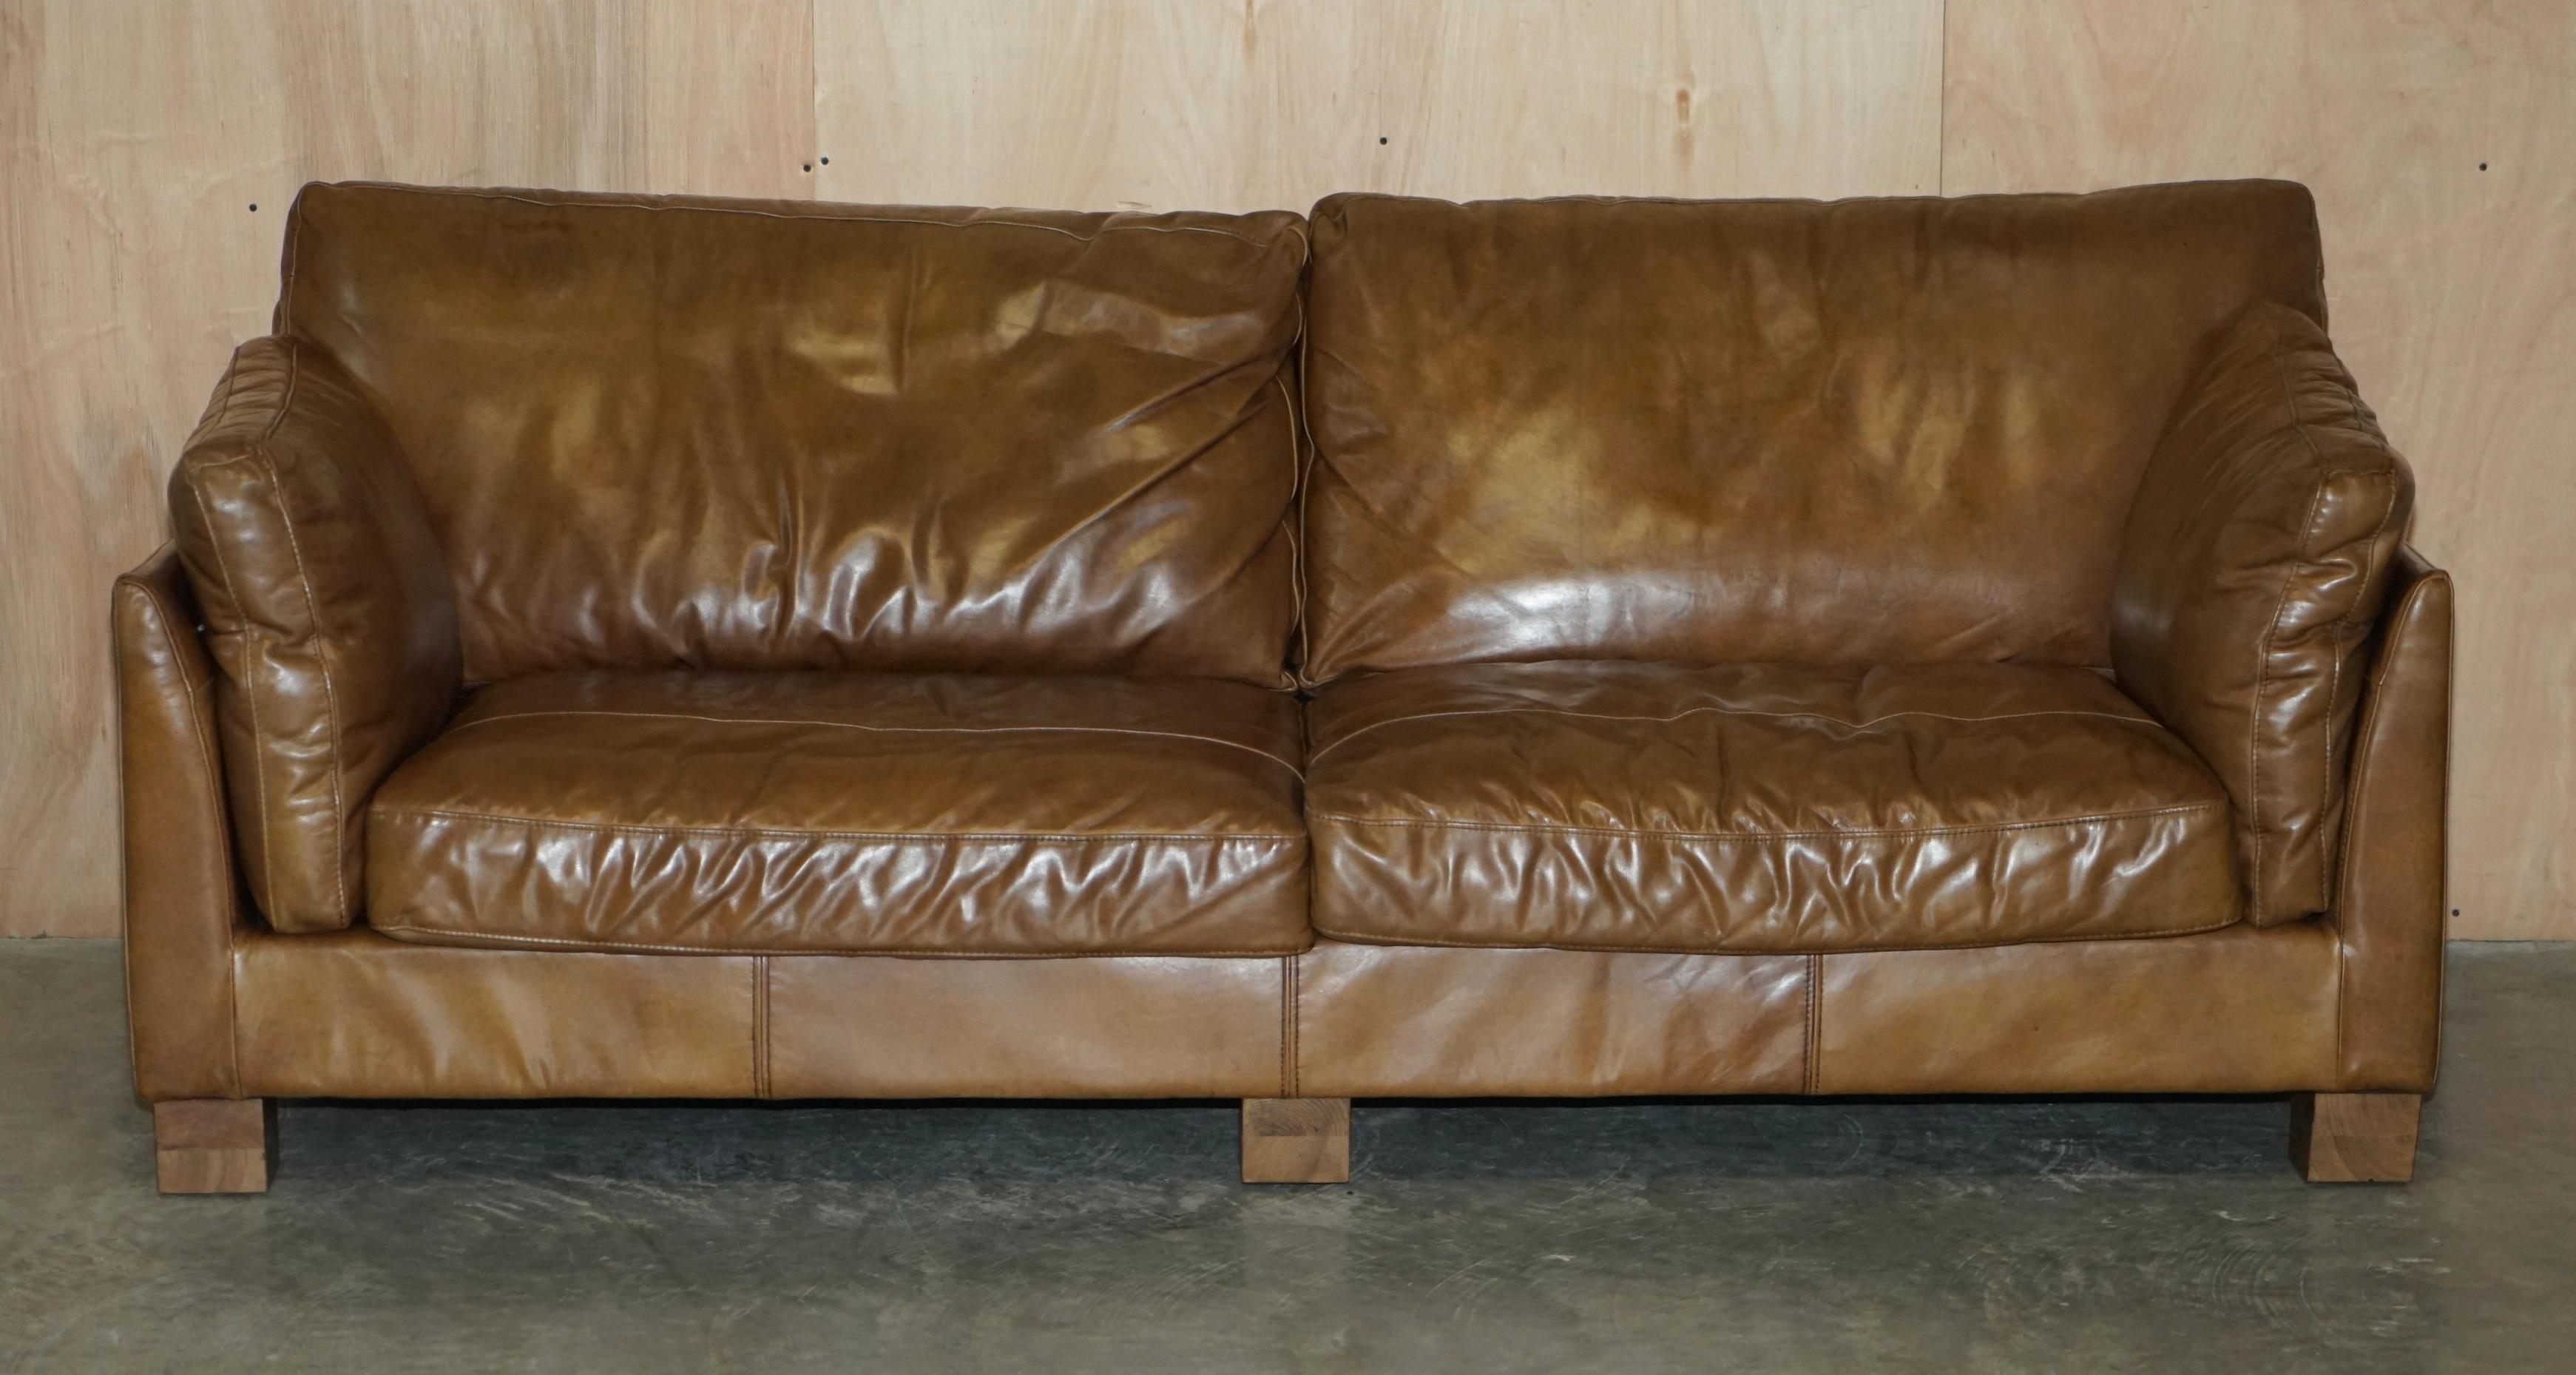 We are delighted to offer for sale this lovely vintage Halo Tan Brown Heritage leather three seat sofa 

The sofa is very comfortable, it has fibre filled cushions which feel like feathers but retain their shape better, it also have the very